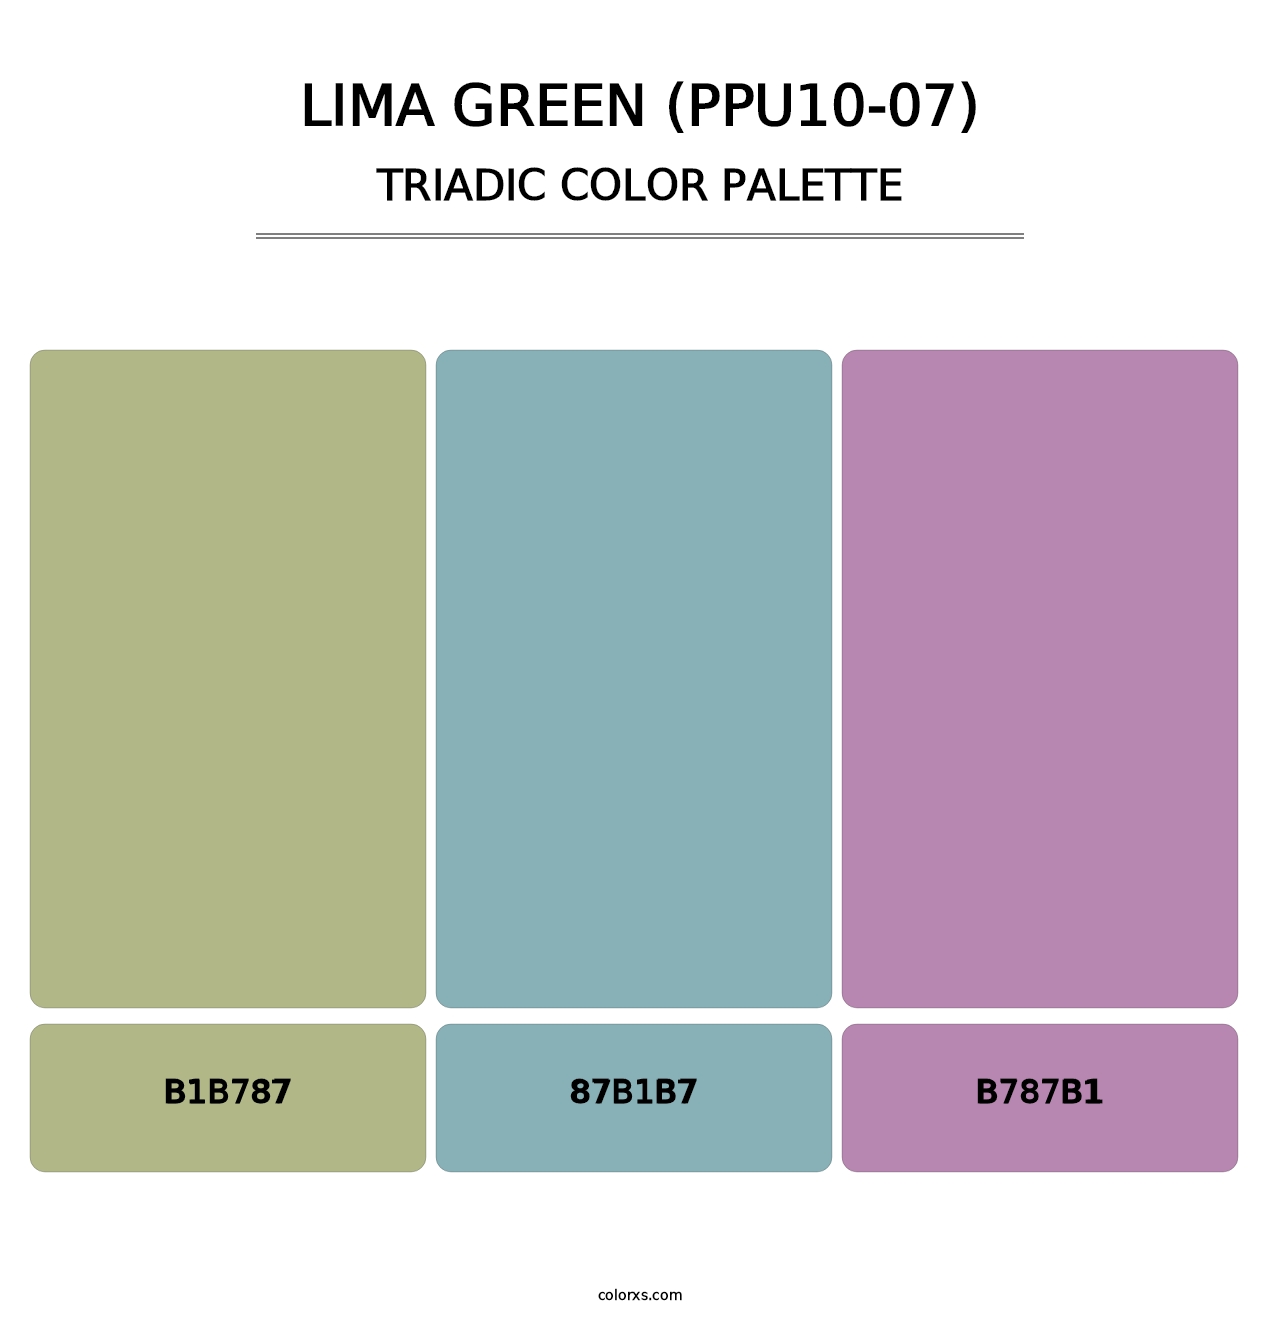 Lima Green (PPU10-07) - Triadic Color Palette